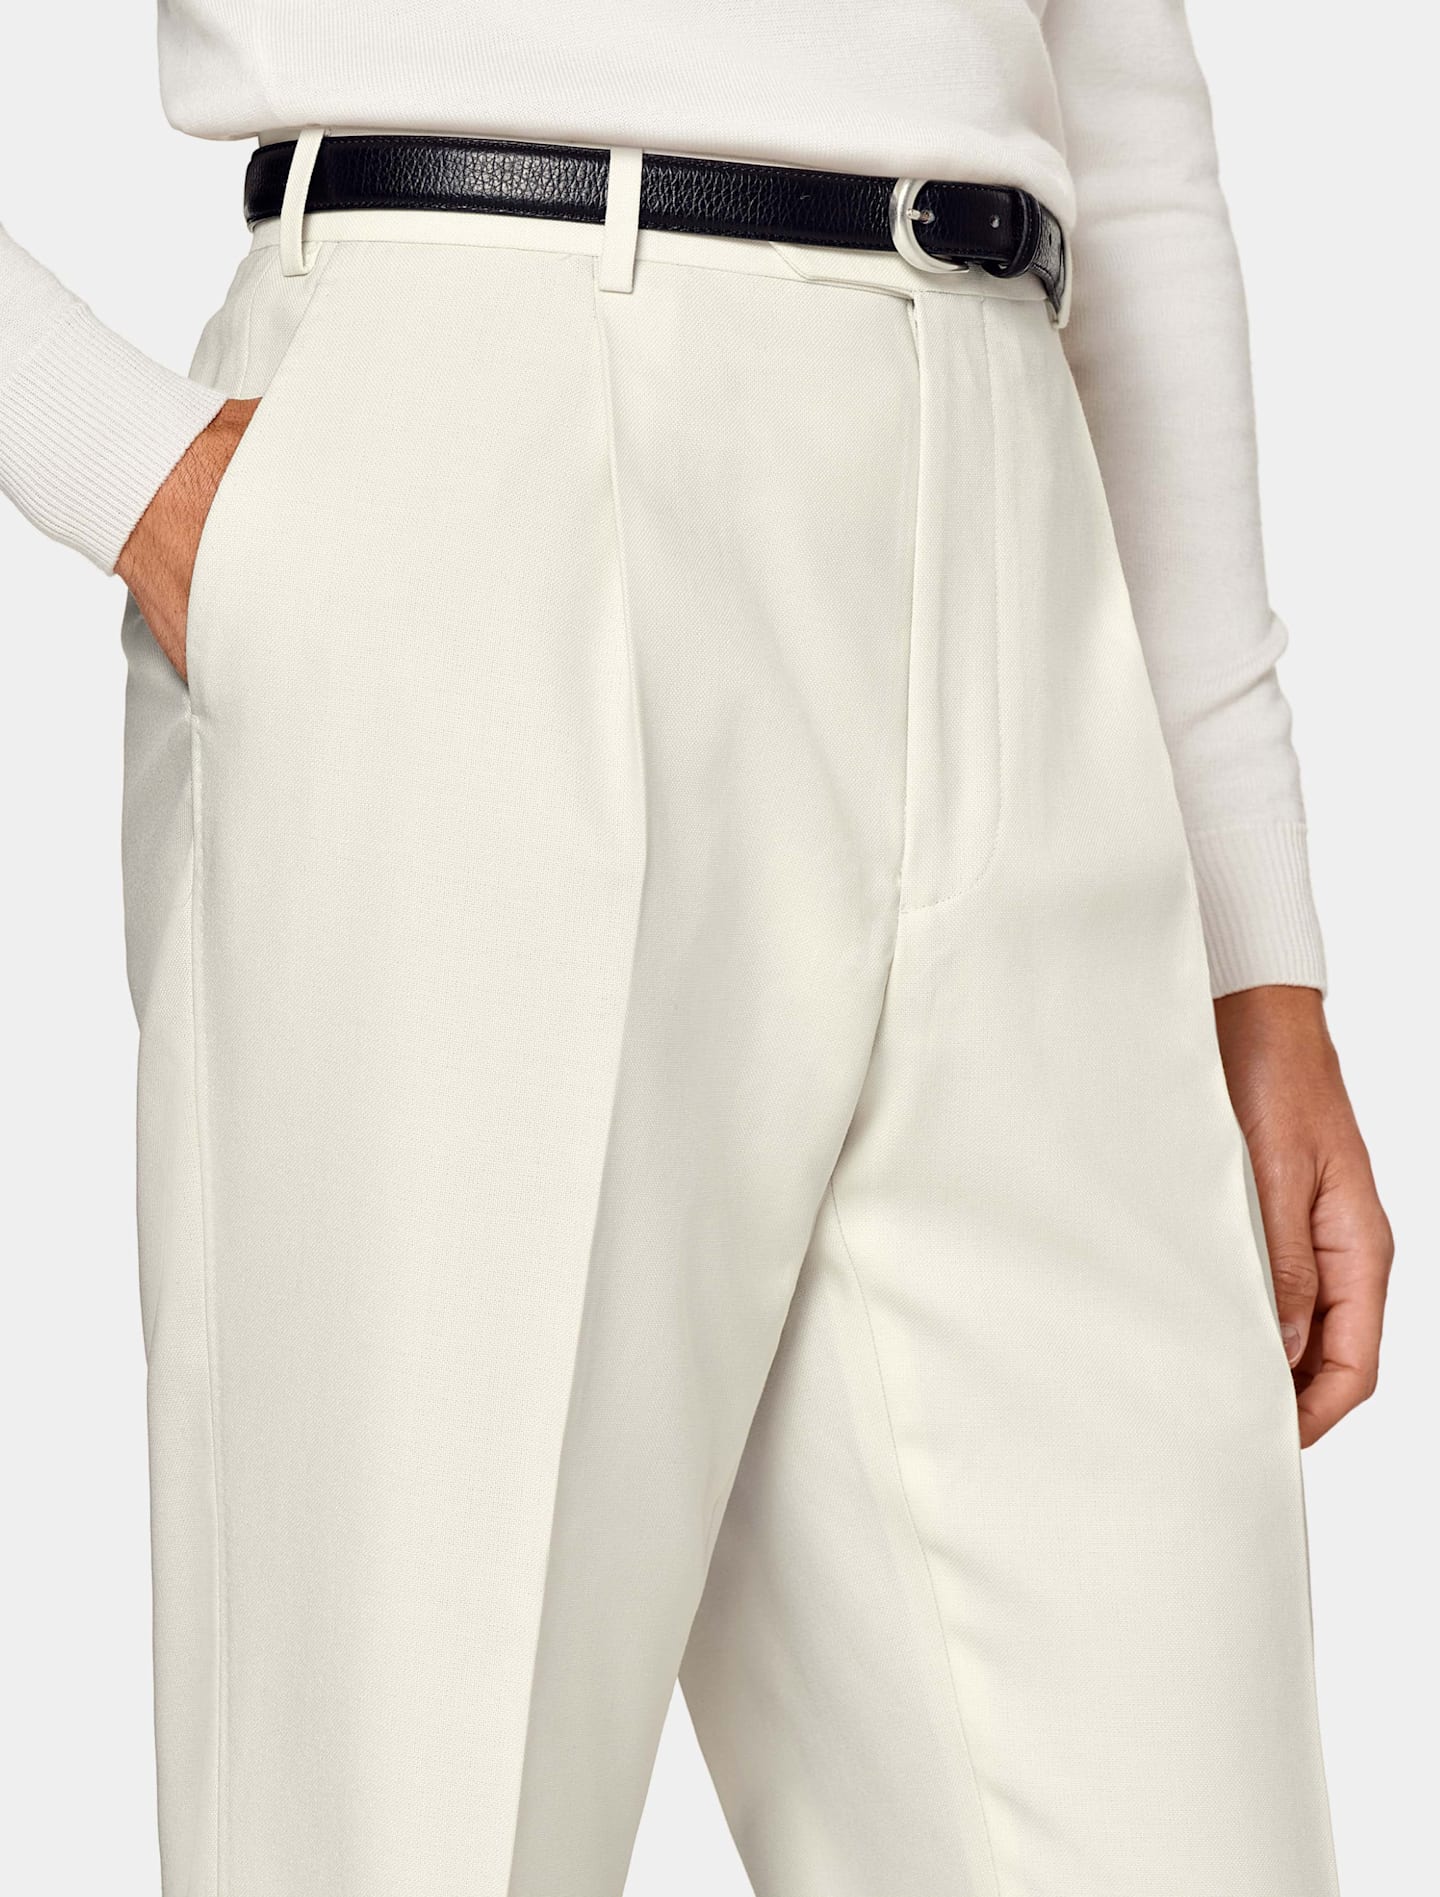 Off-white straight-fit trousers with black belt and white knit.